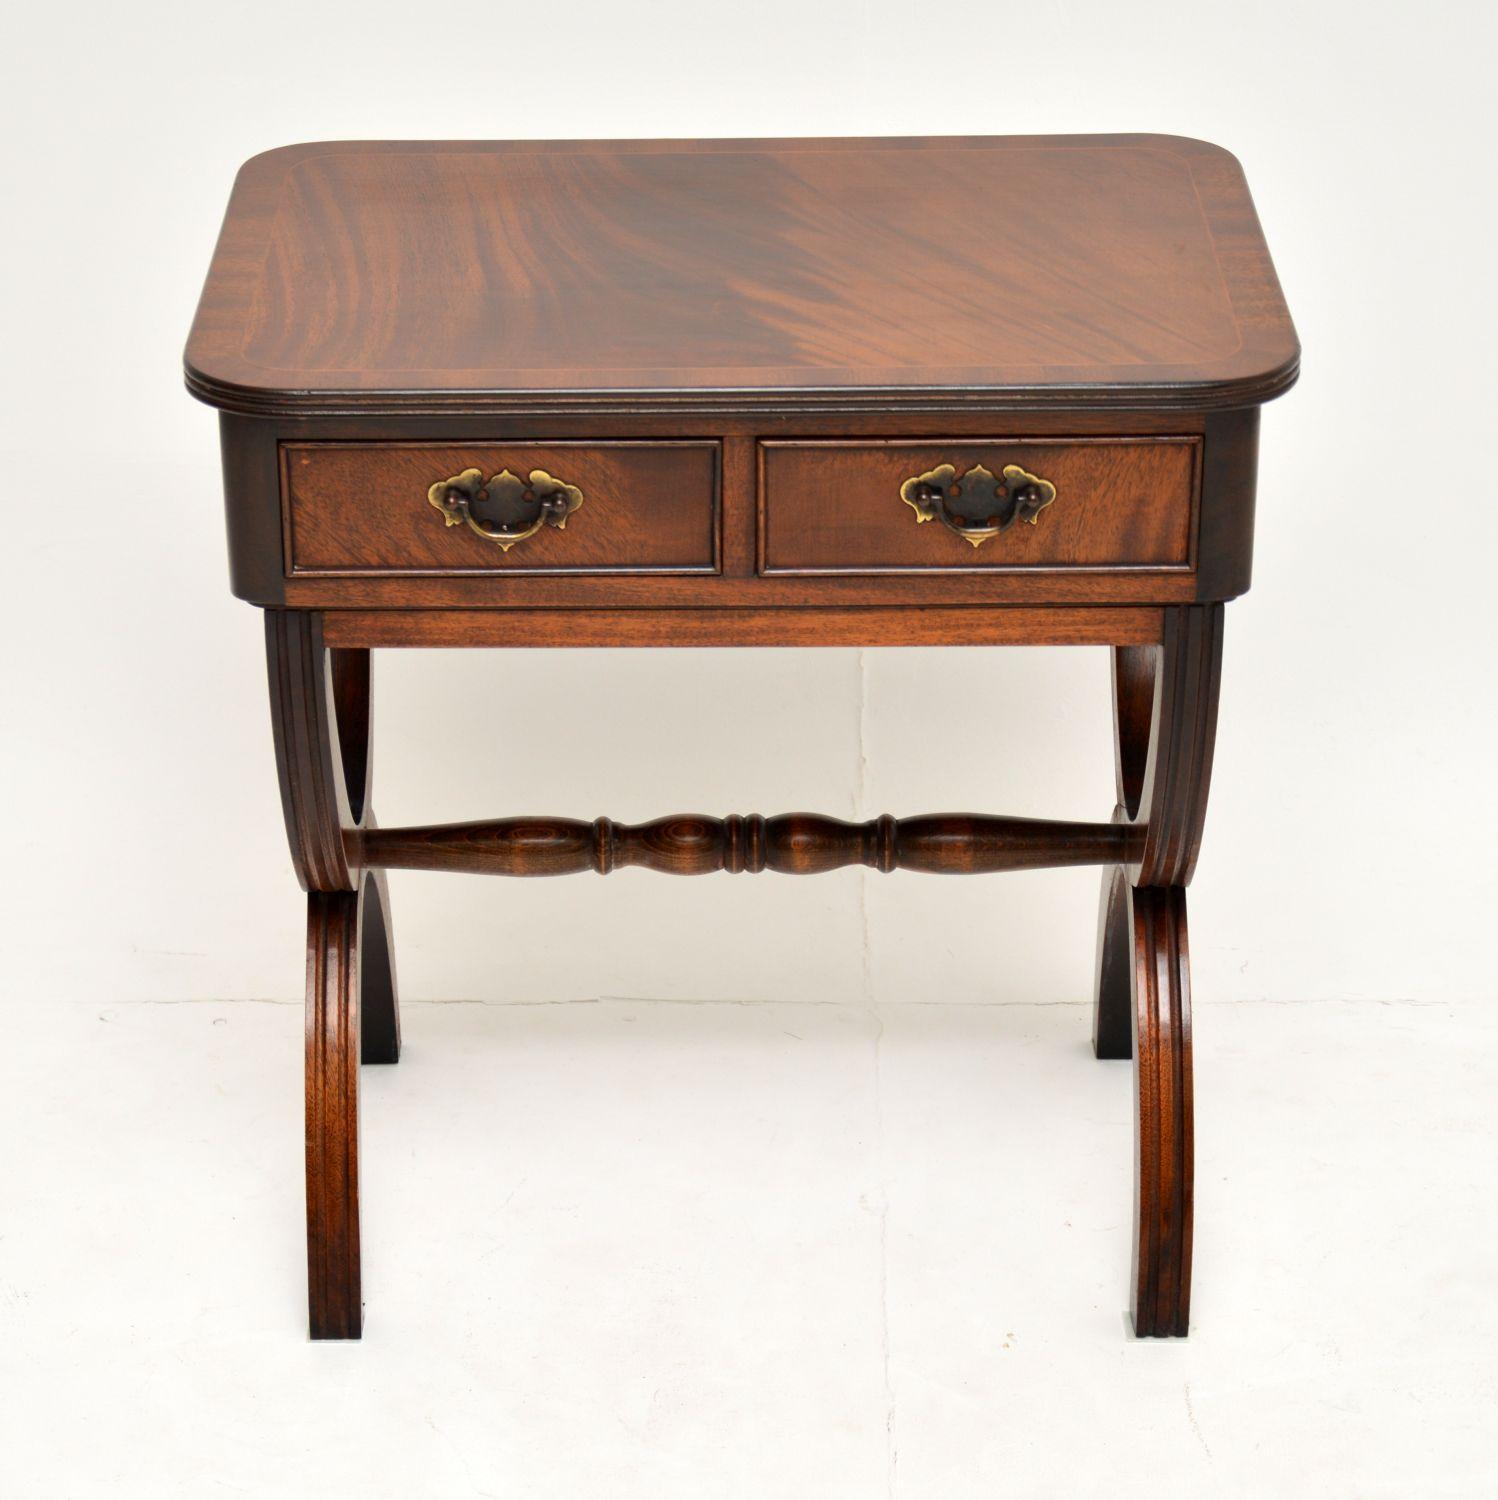 Antique Regency style mahogany side table of small proportions, in excellent condition and dating from circa 1950s period.

It has a flame mahogany top with a satinwood stringing and mahogany cross banding outside. The top edge is reeded and the